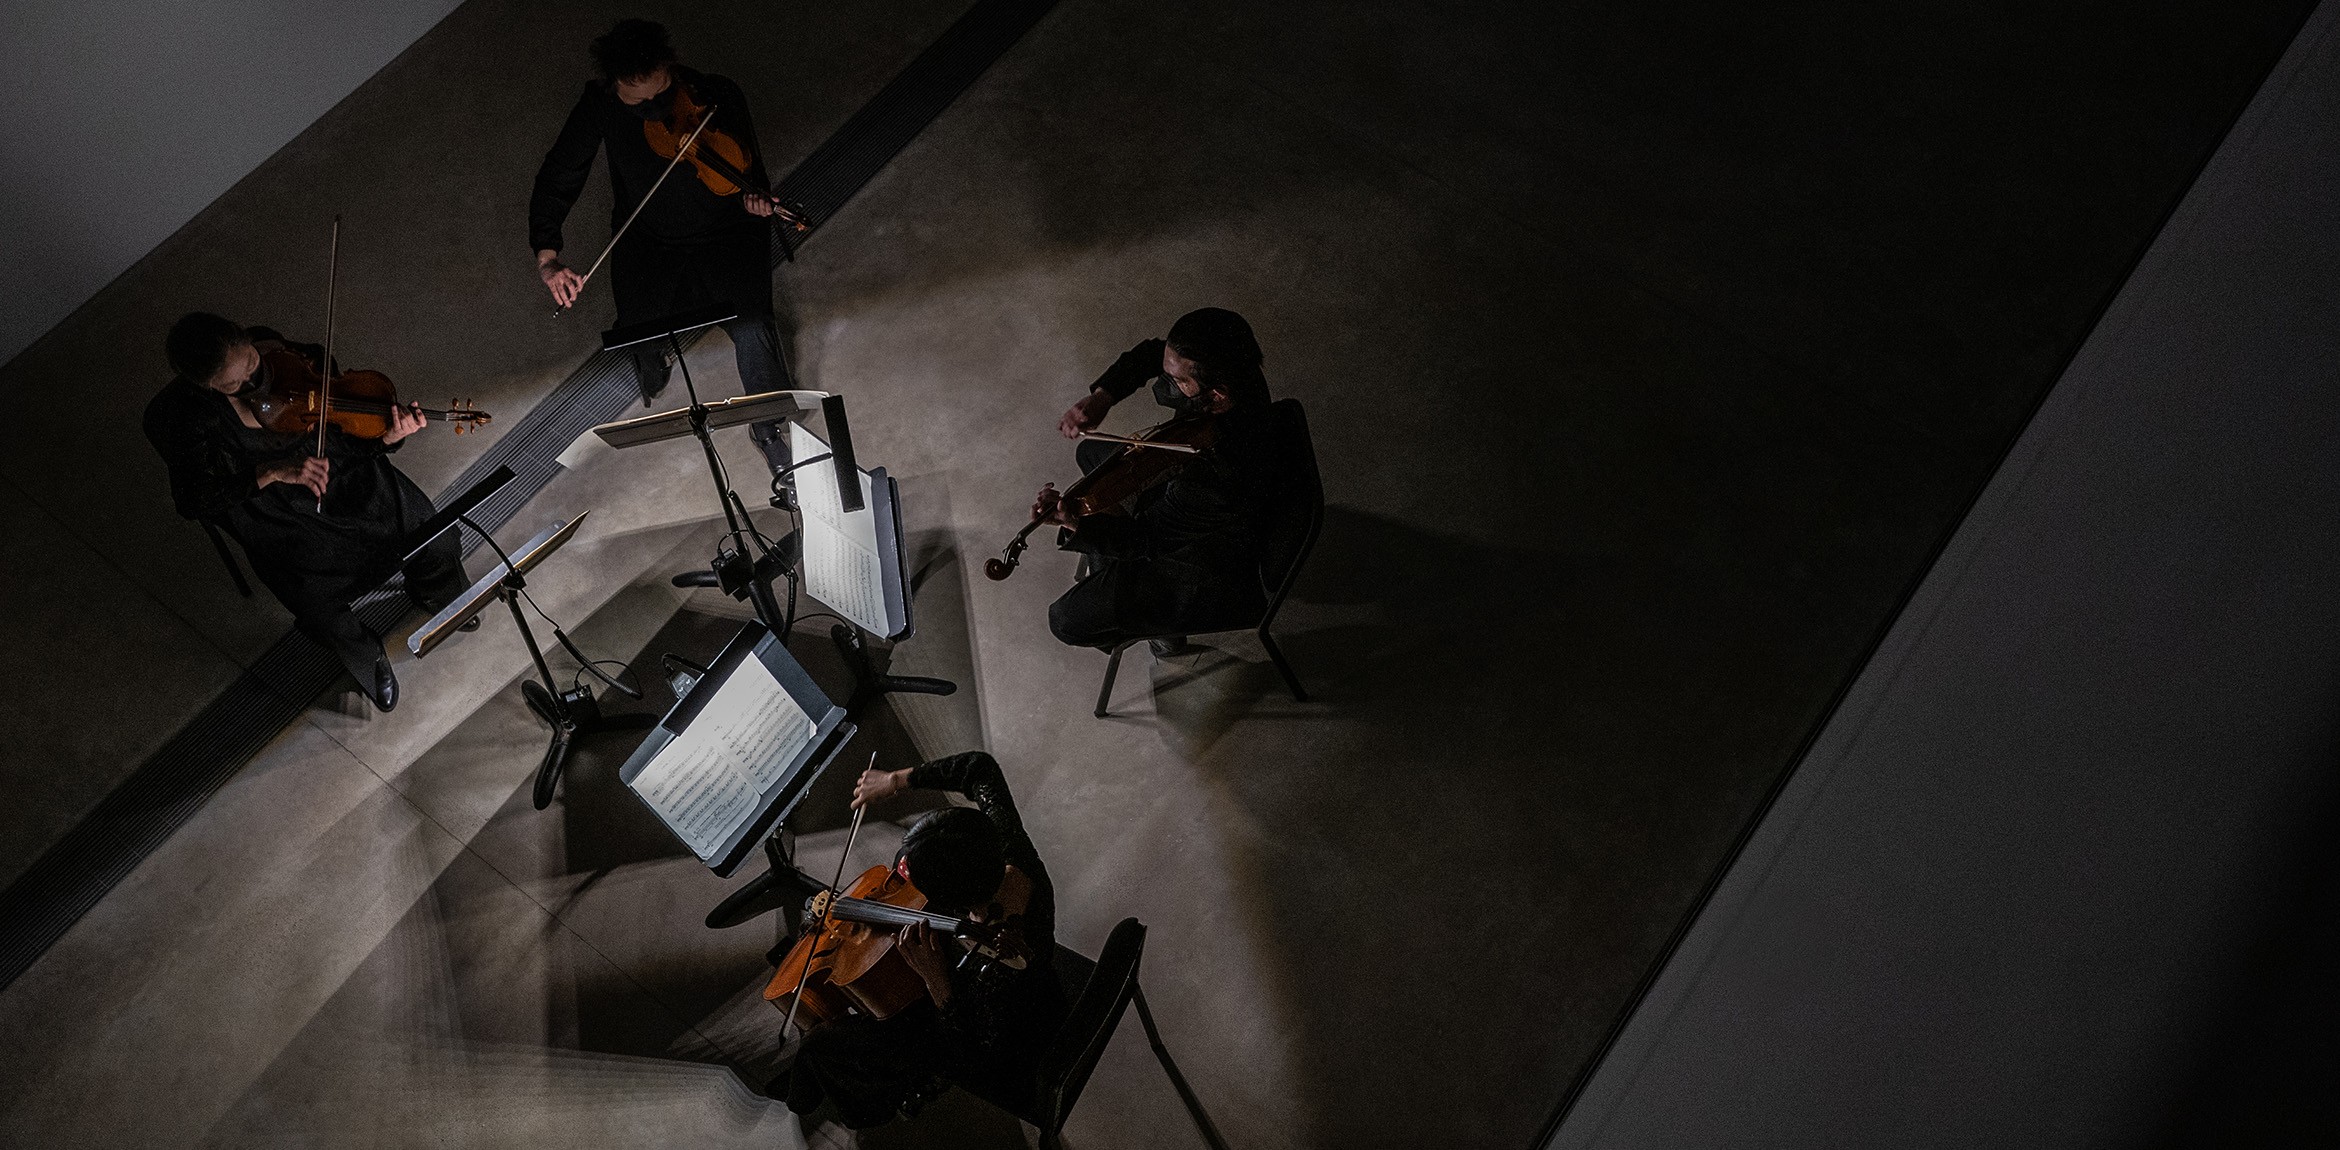 Top view of four string musicians performing in a dimly lit room